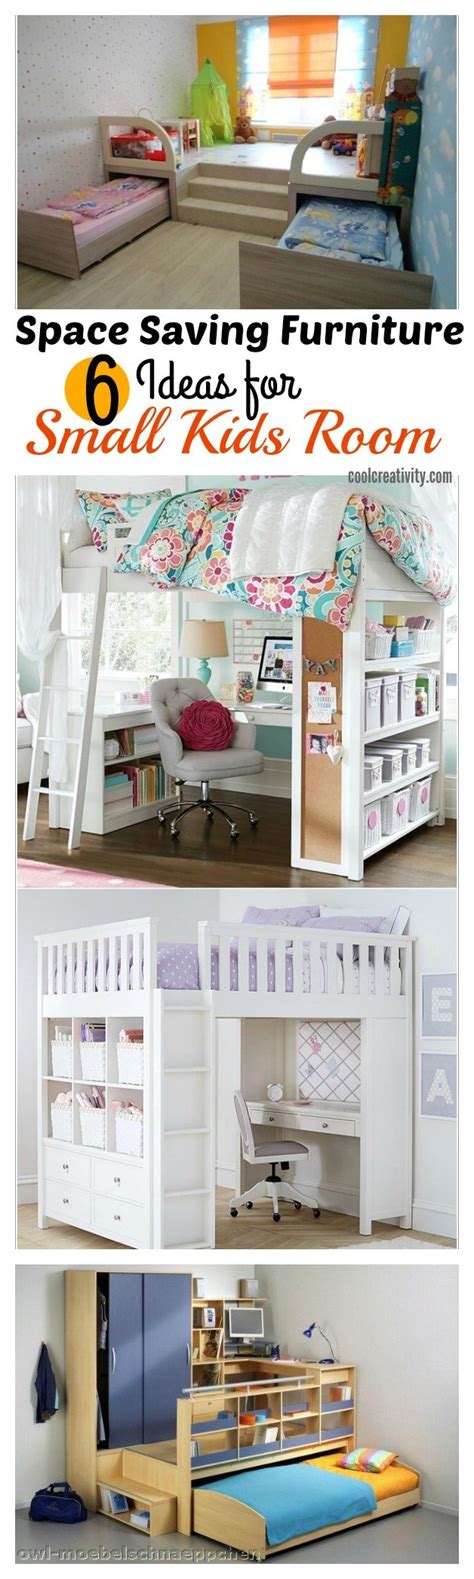 These small bedroom ideas are sure to help you make the most of your small space! 6 Space Saving Furniture Ideas for Small Kids Room